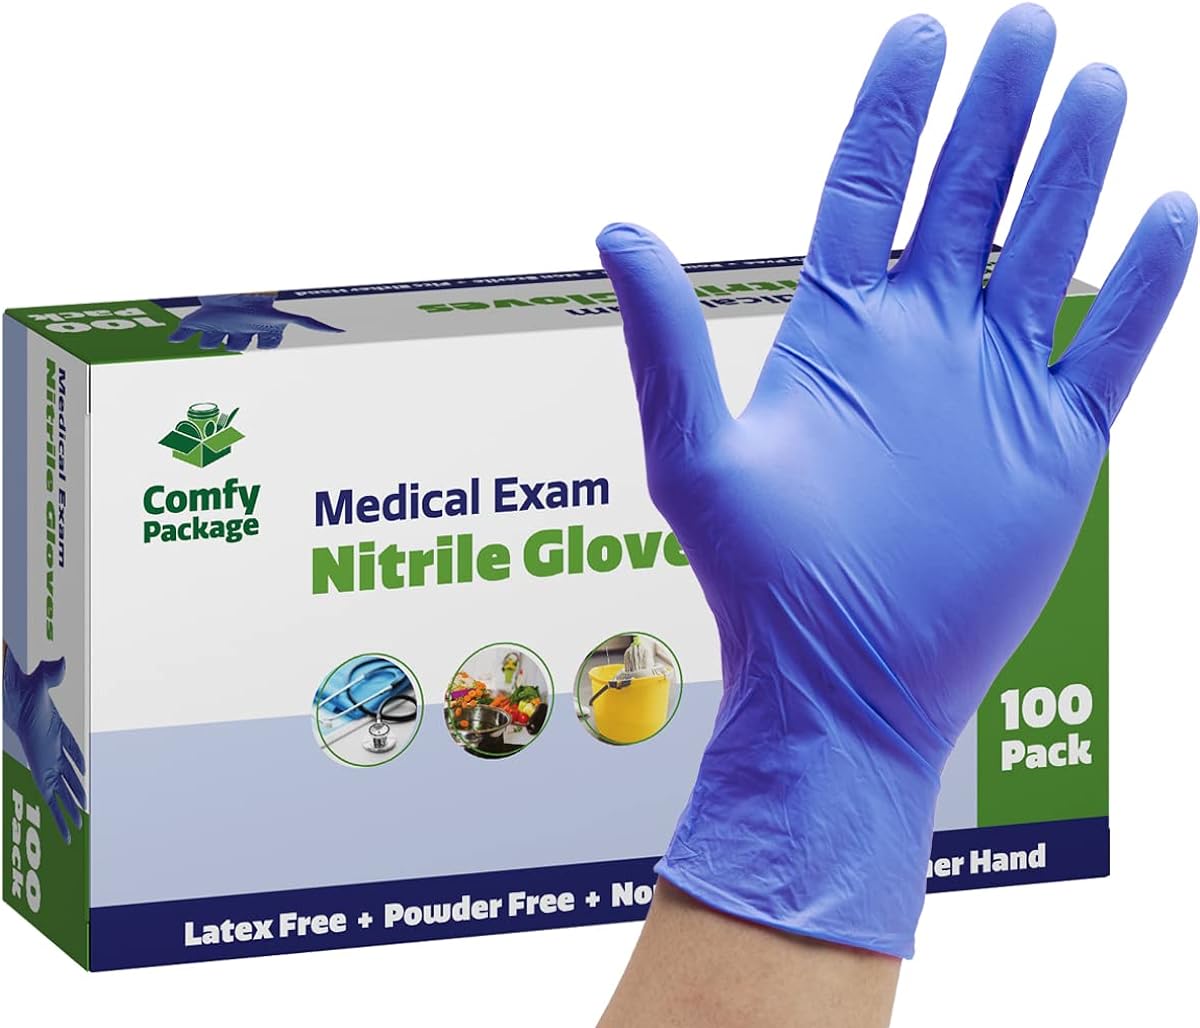 100 Count] Nitrile Disposable Plastic Gloves - 4 mil. | Latex Free and Rubber Free | Non-Sterile Powder Free Gloves